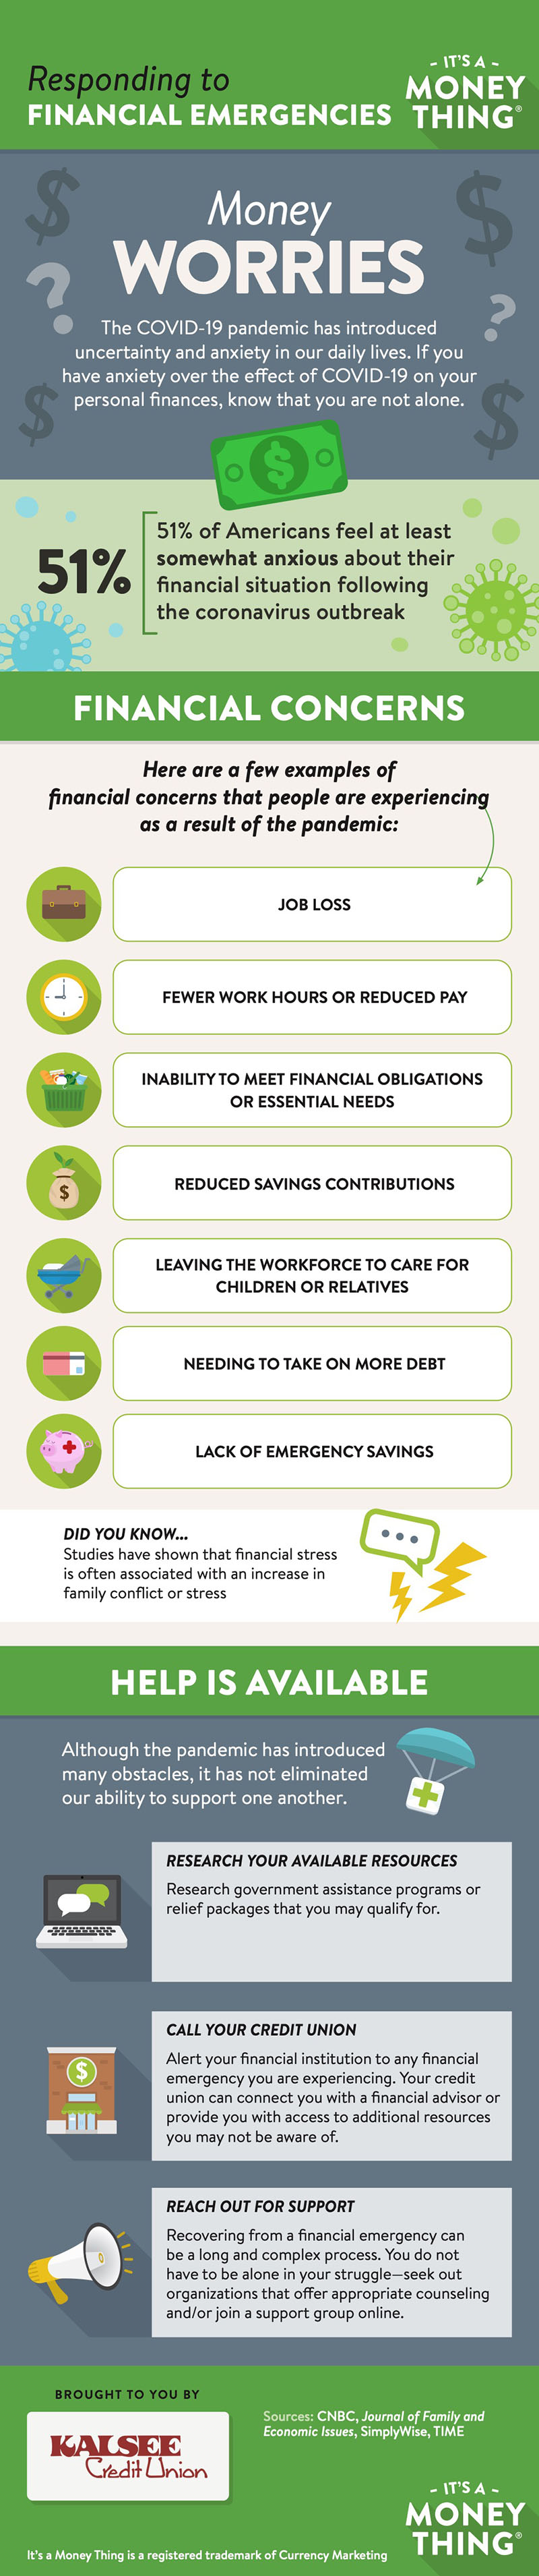 Responding to financial emergencies infographic